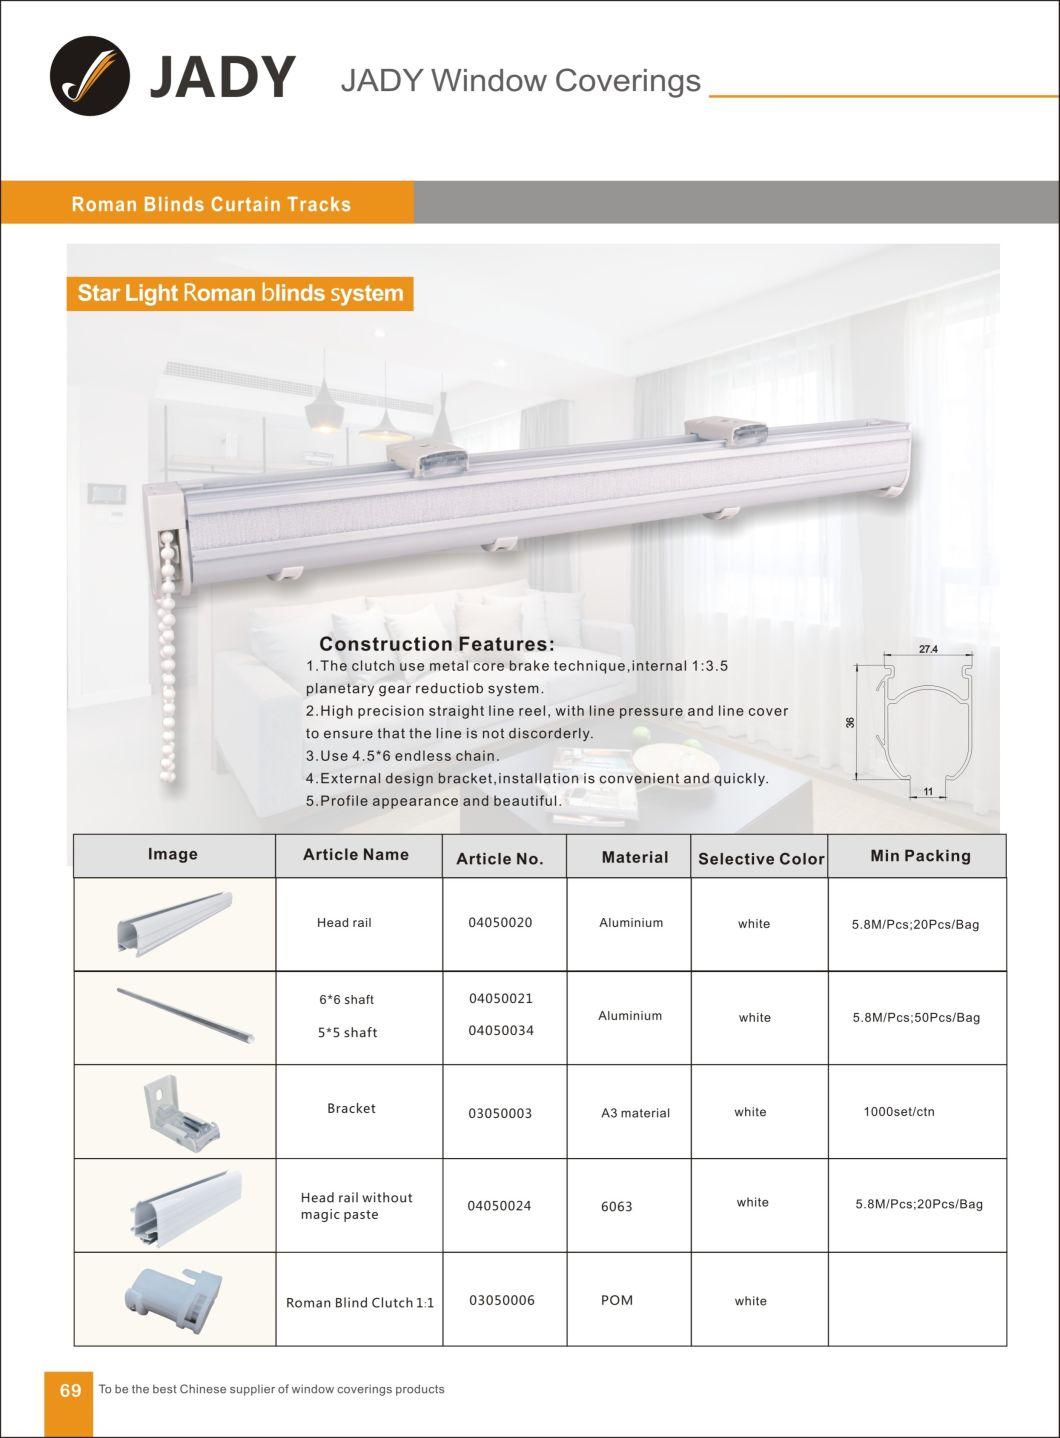 Customized Motorized High Quality Blackout Sunscreen Fabric Roller Blinds/ Manual Electric Roman Blinds / Window Blinds